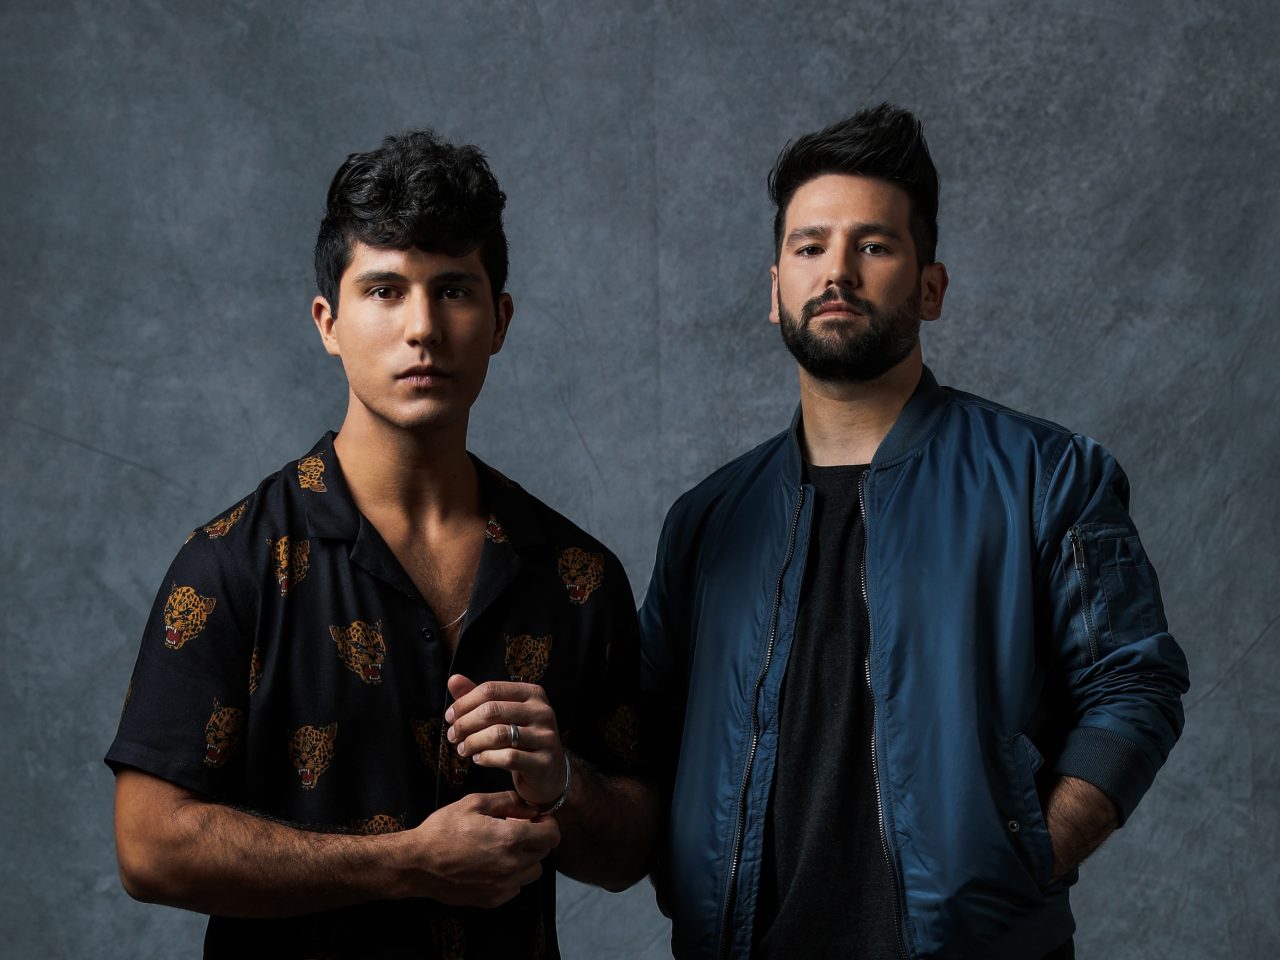 Dan & Shay Scores Sixth Career No. 1 With ‘All To Myself’